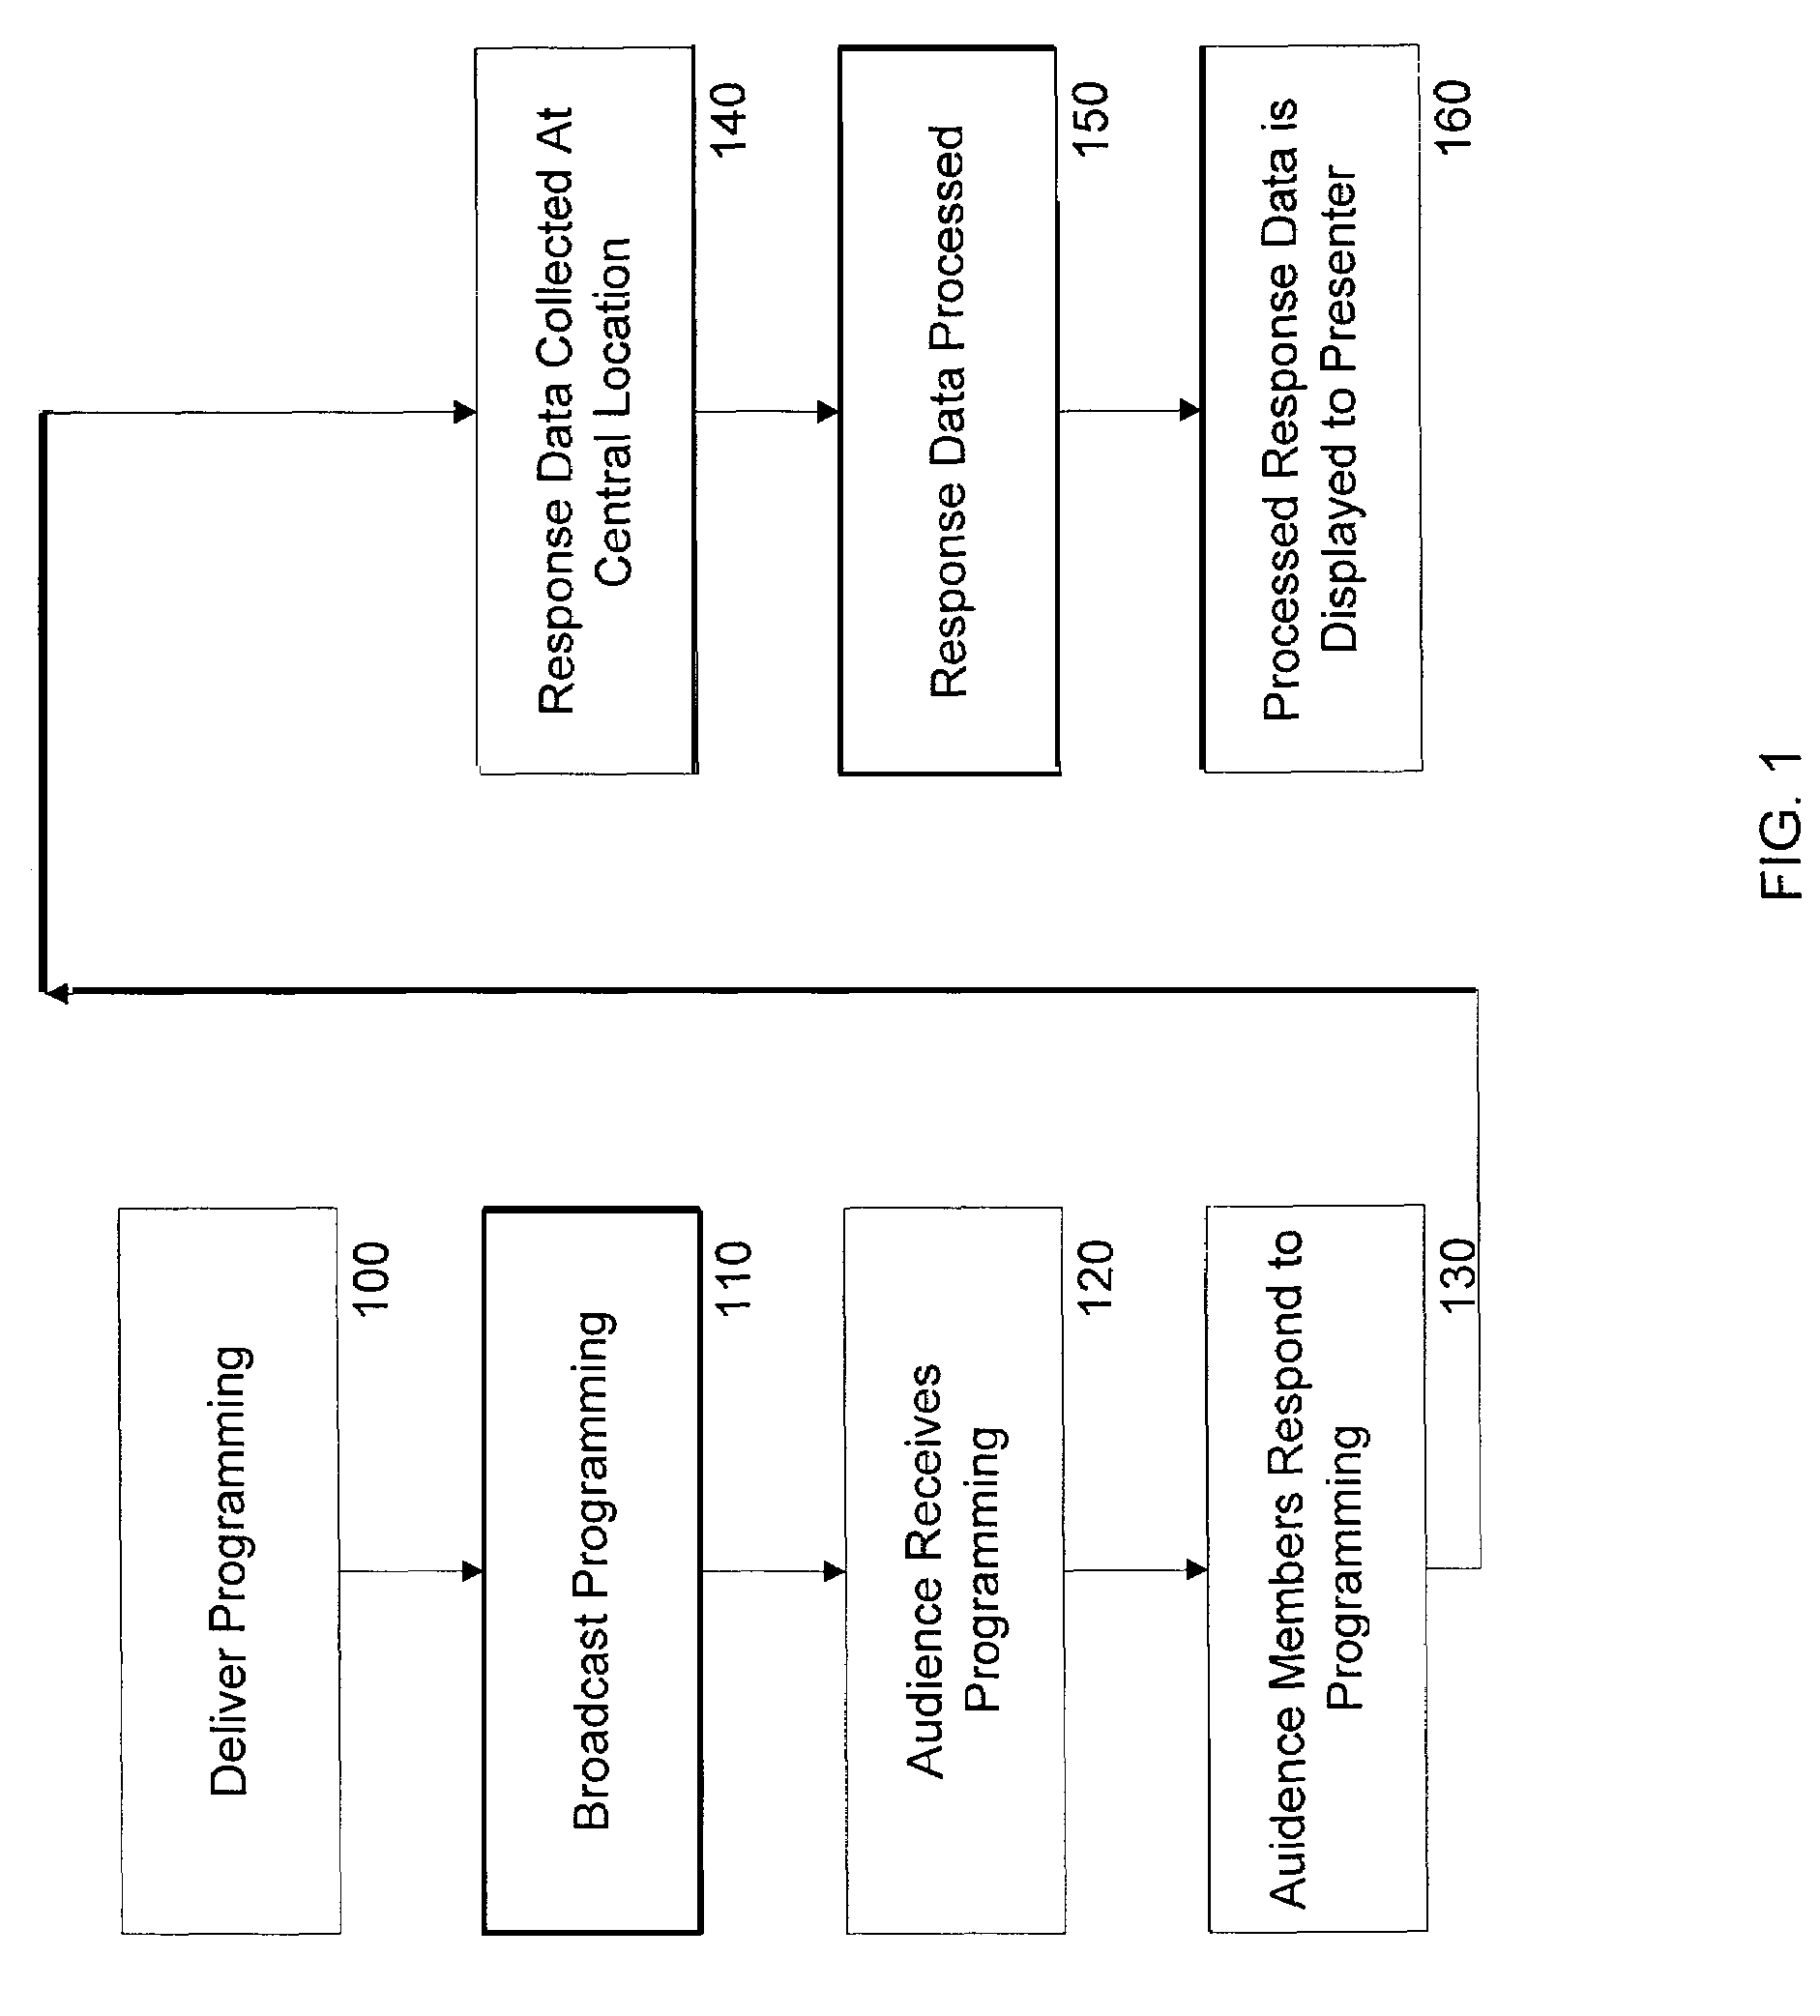 Response apparatus method and system